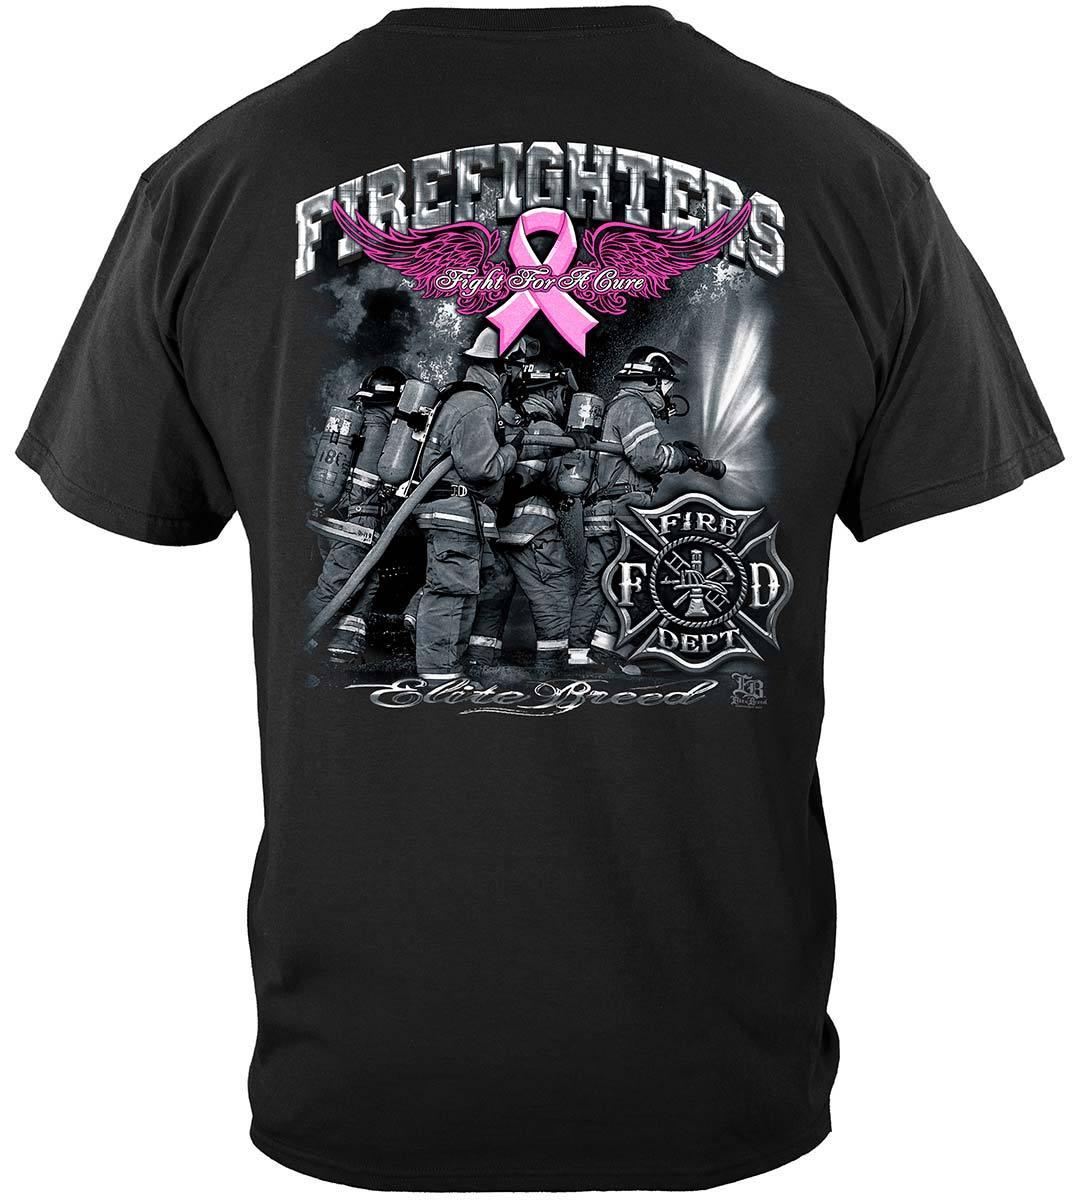 Firefighters Elite Breed Cure for Cancer Hoodie - Military Republic